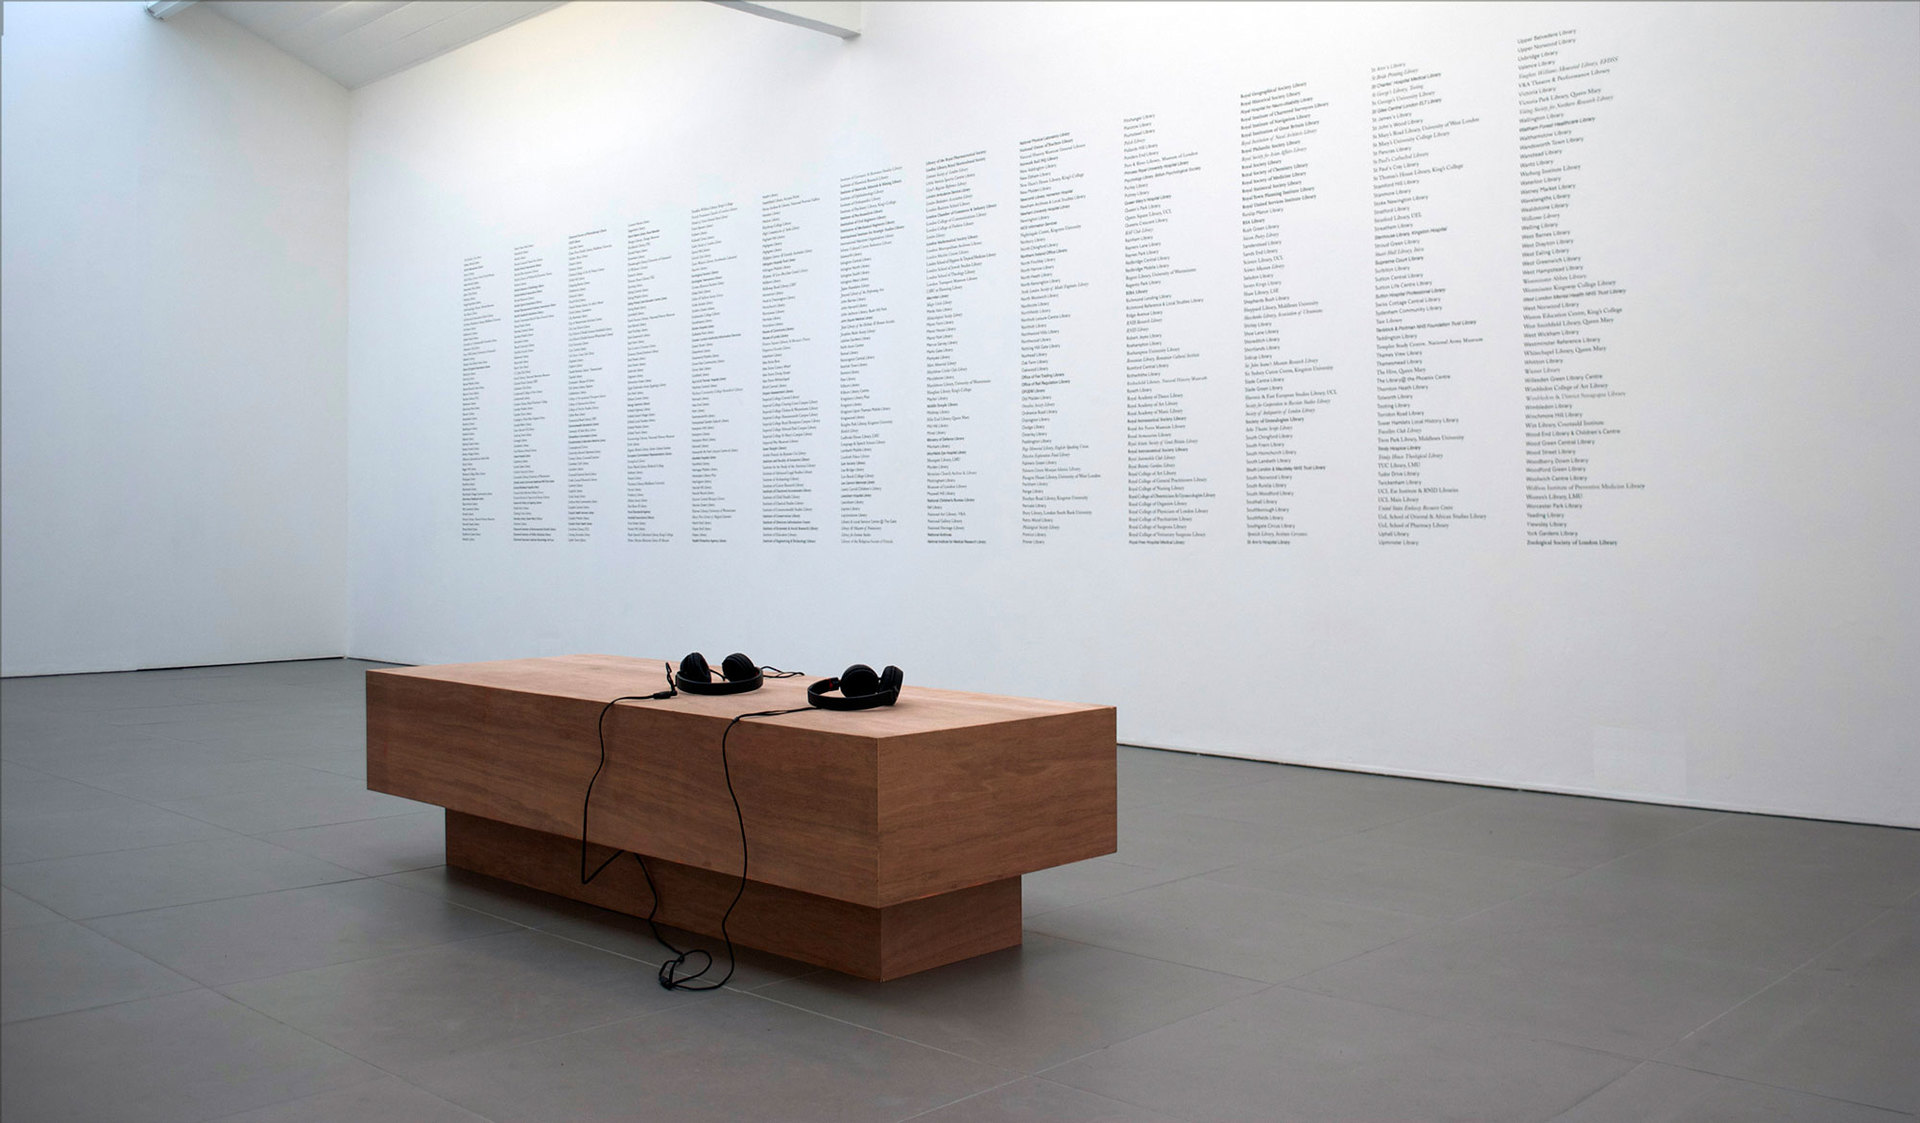 Ruth Beale, Now from Now, 2011, plywood, foam, fabric, headphones, audio on mp3, duration 9 min., library books from a selection of public libraries in london (58 x 160 cm), Cell Project Space